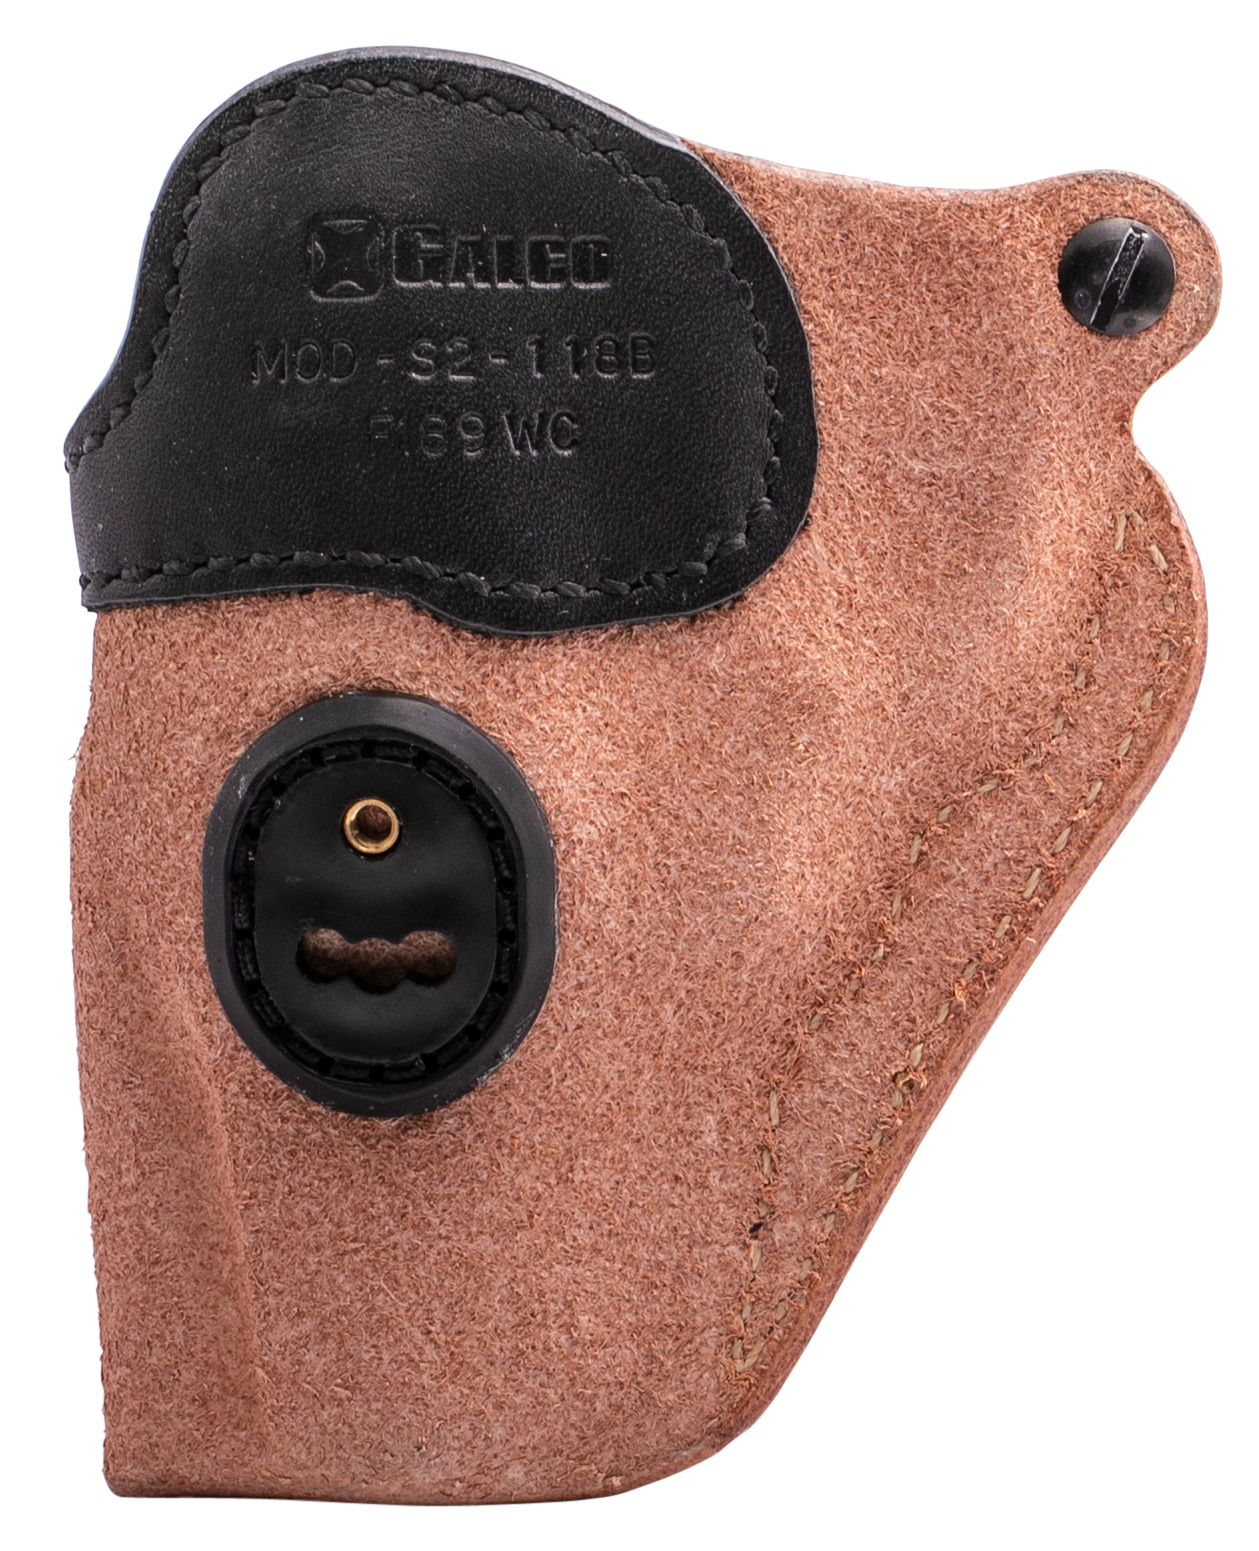 Galco Scout 3.0 IWB Holster - Ruger SP101 2.25